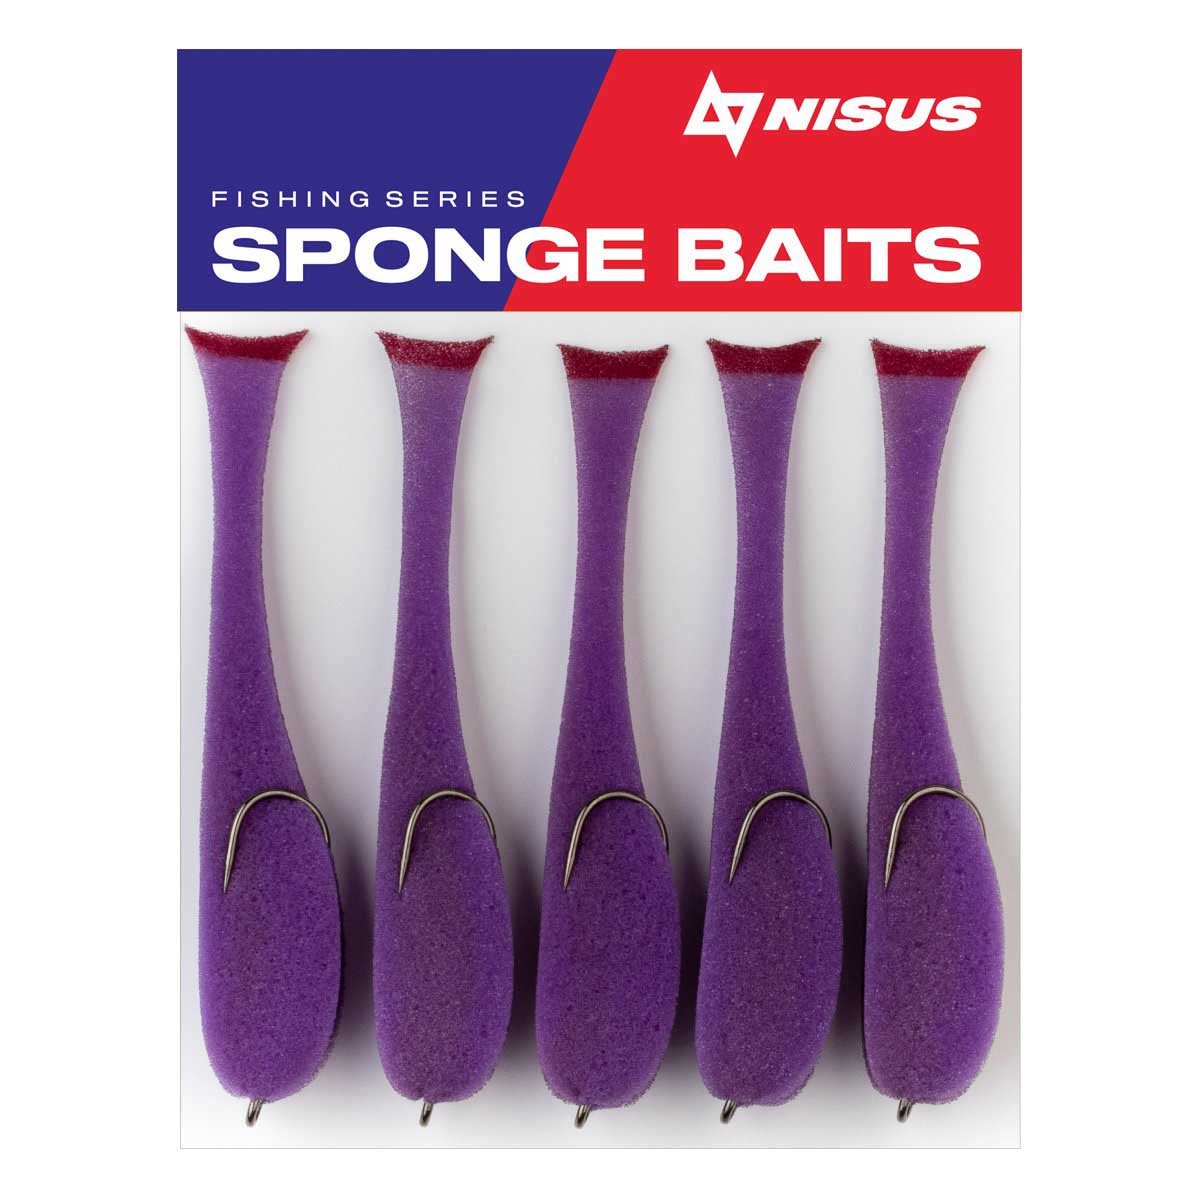 5.5" Sponge Bait with a Double Hook for Predatory Fish, Multi-Colored, 5 pcs